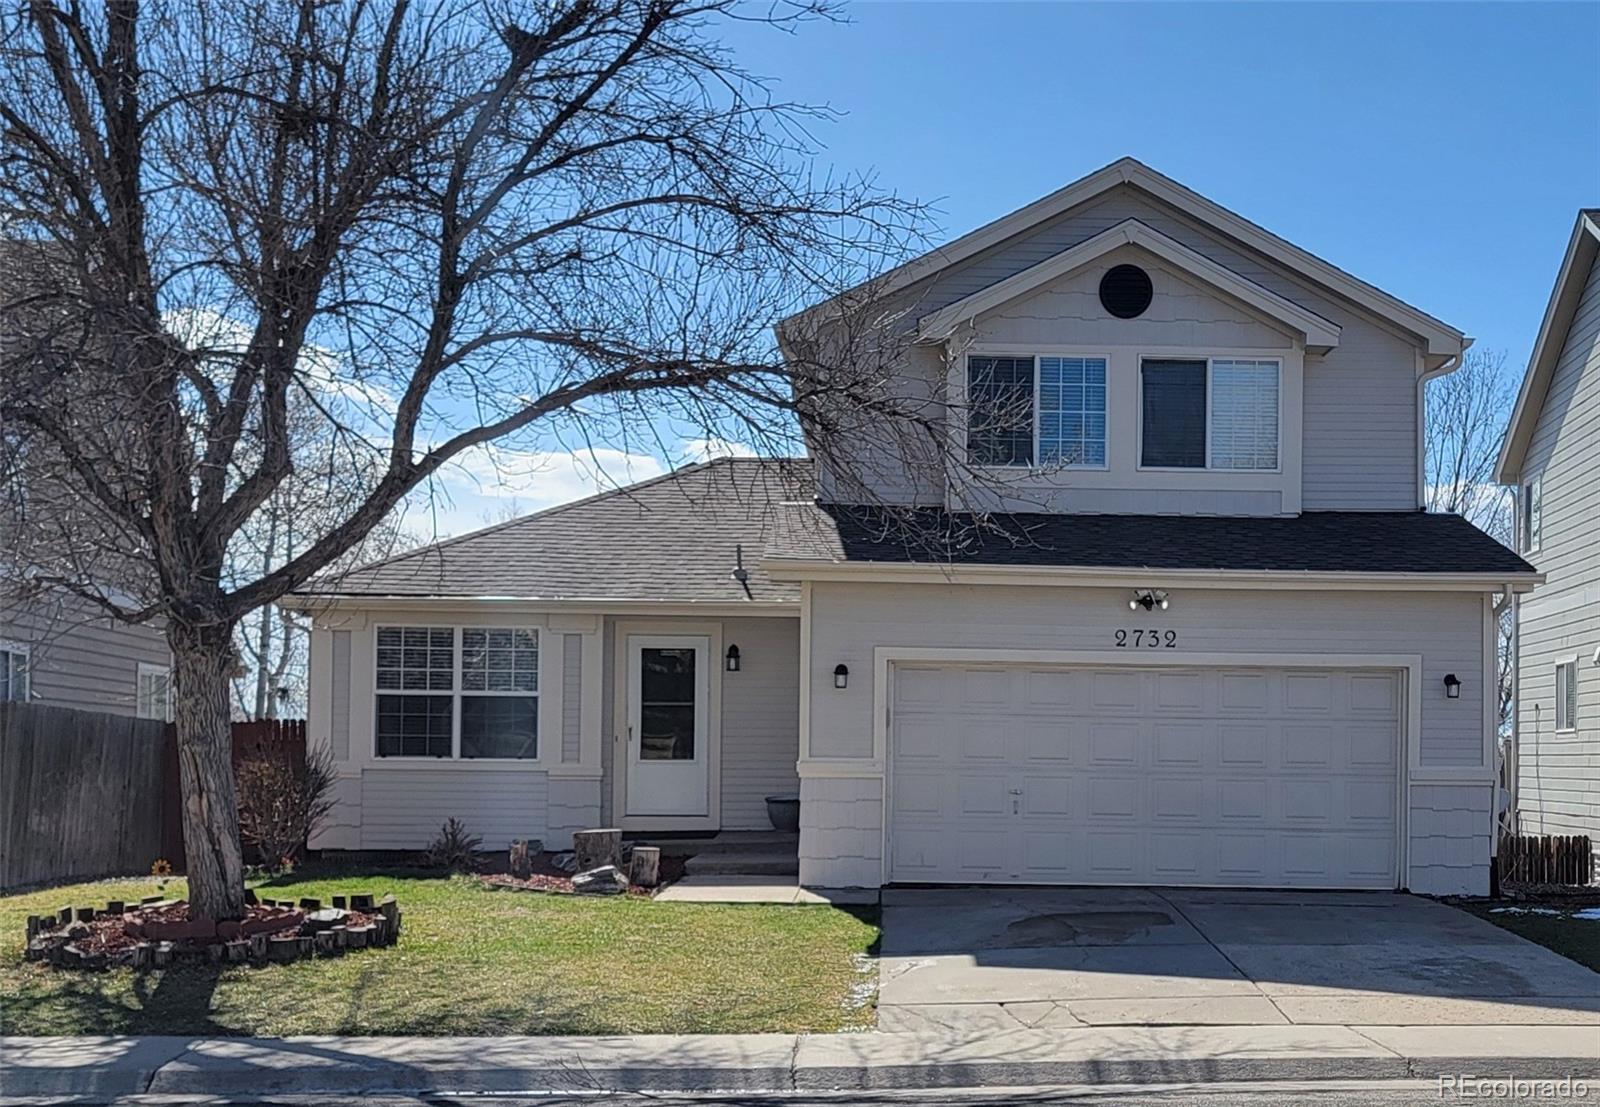 2732 E 132nd Place, thornton MLS: 4084013 Beds: 3 Baths: 3 Price: $585,000